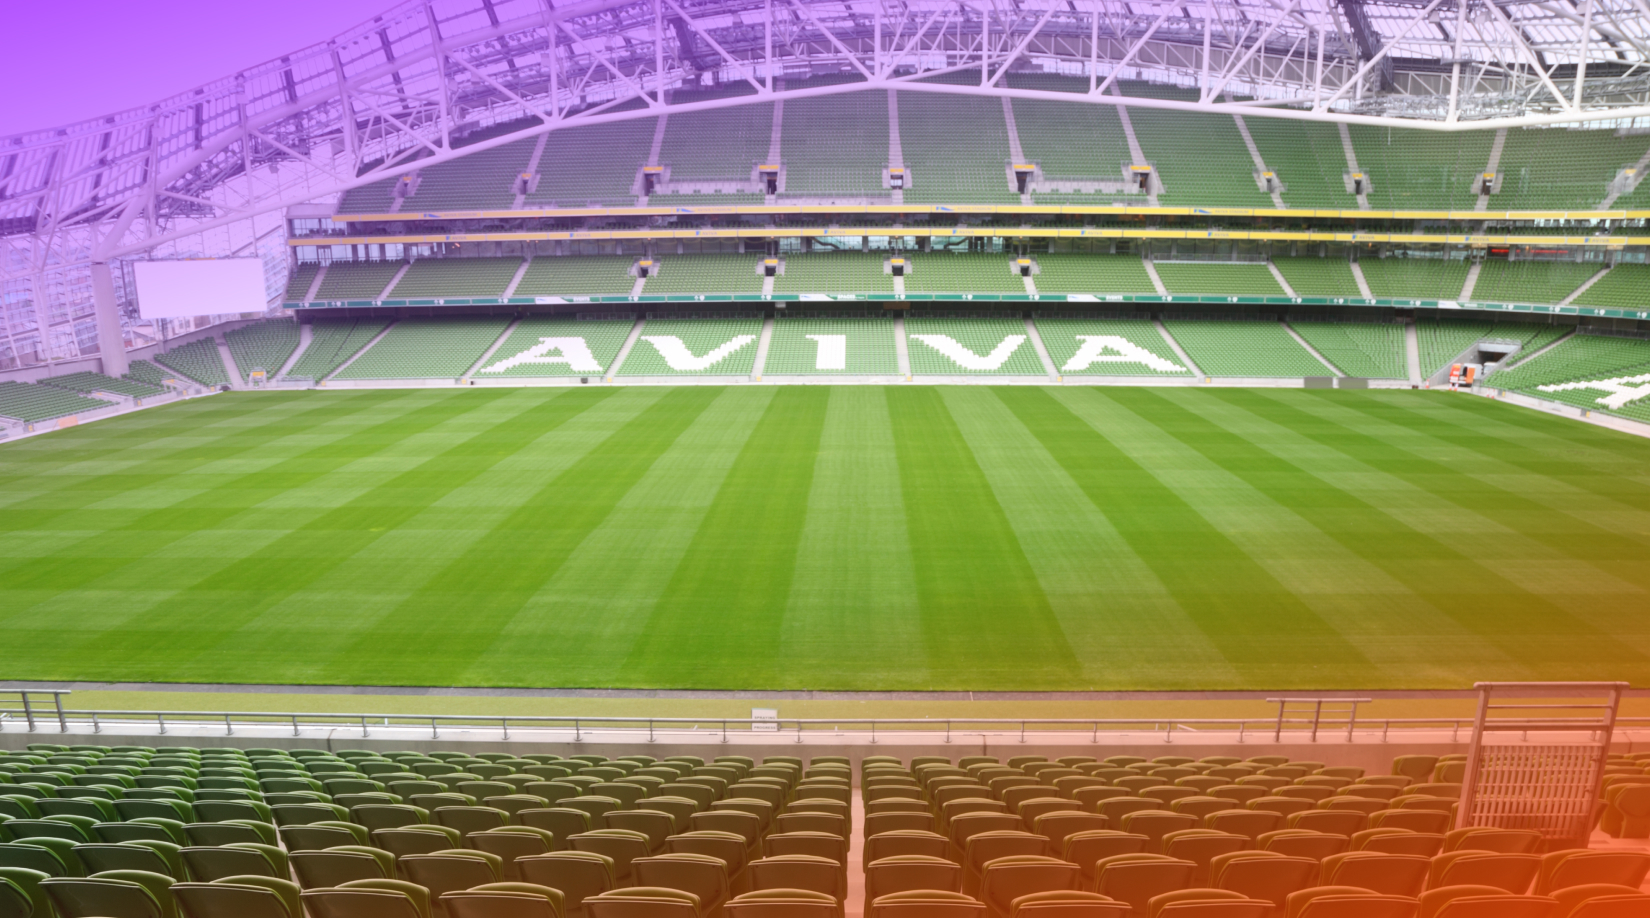 Atalanta vs Bayer Leverkusen in Dublin on the 22nd – this should be a great game!